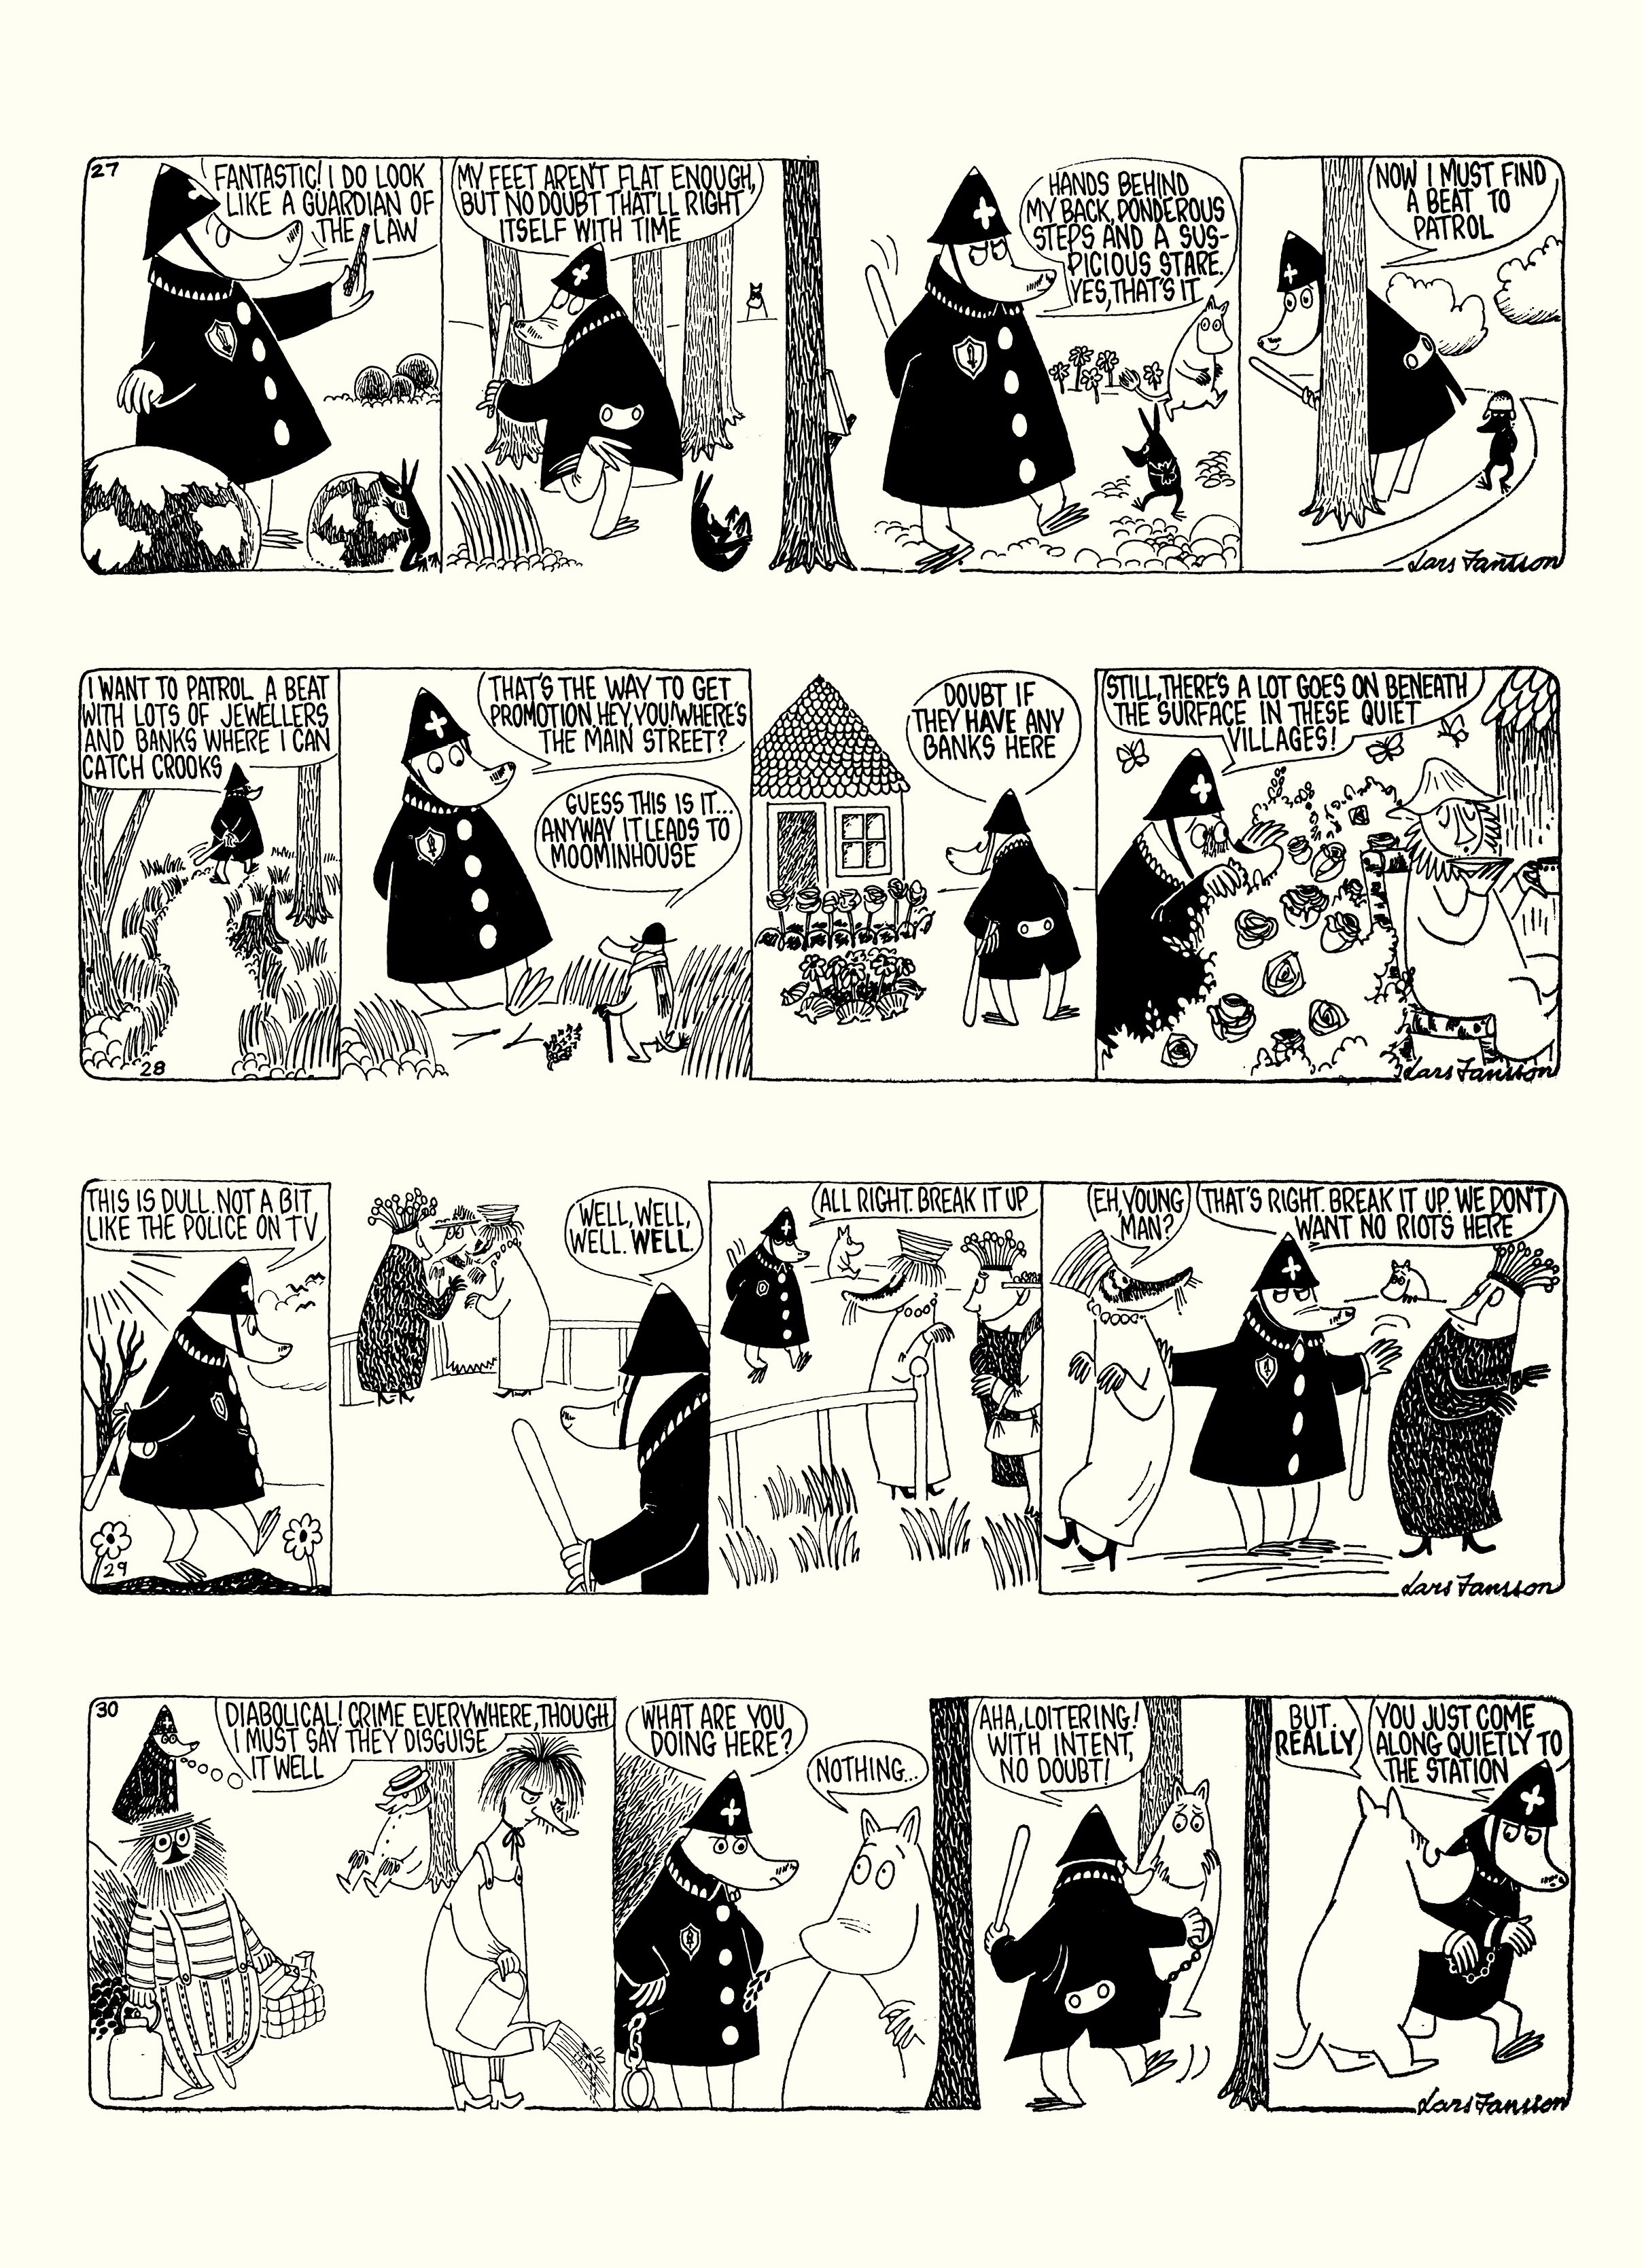 Read online Moomin: The Complete Lars Jansson Comic Strip comic -  Issue # TPB 8 - 78